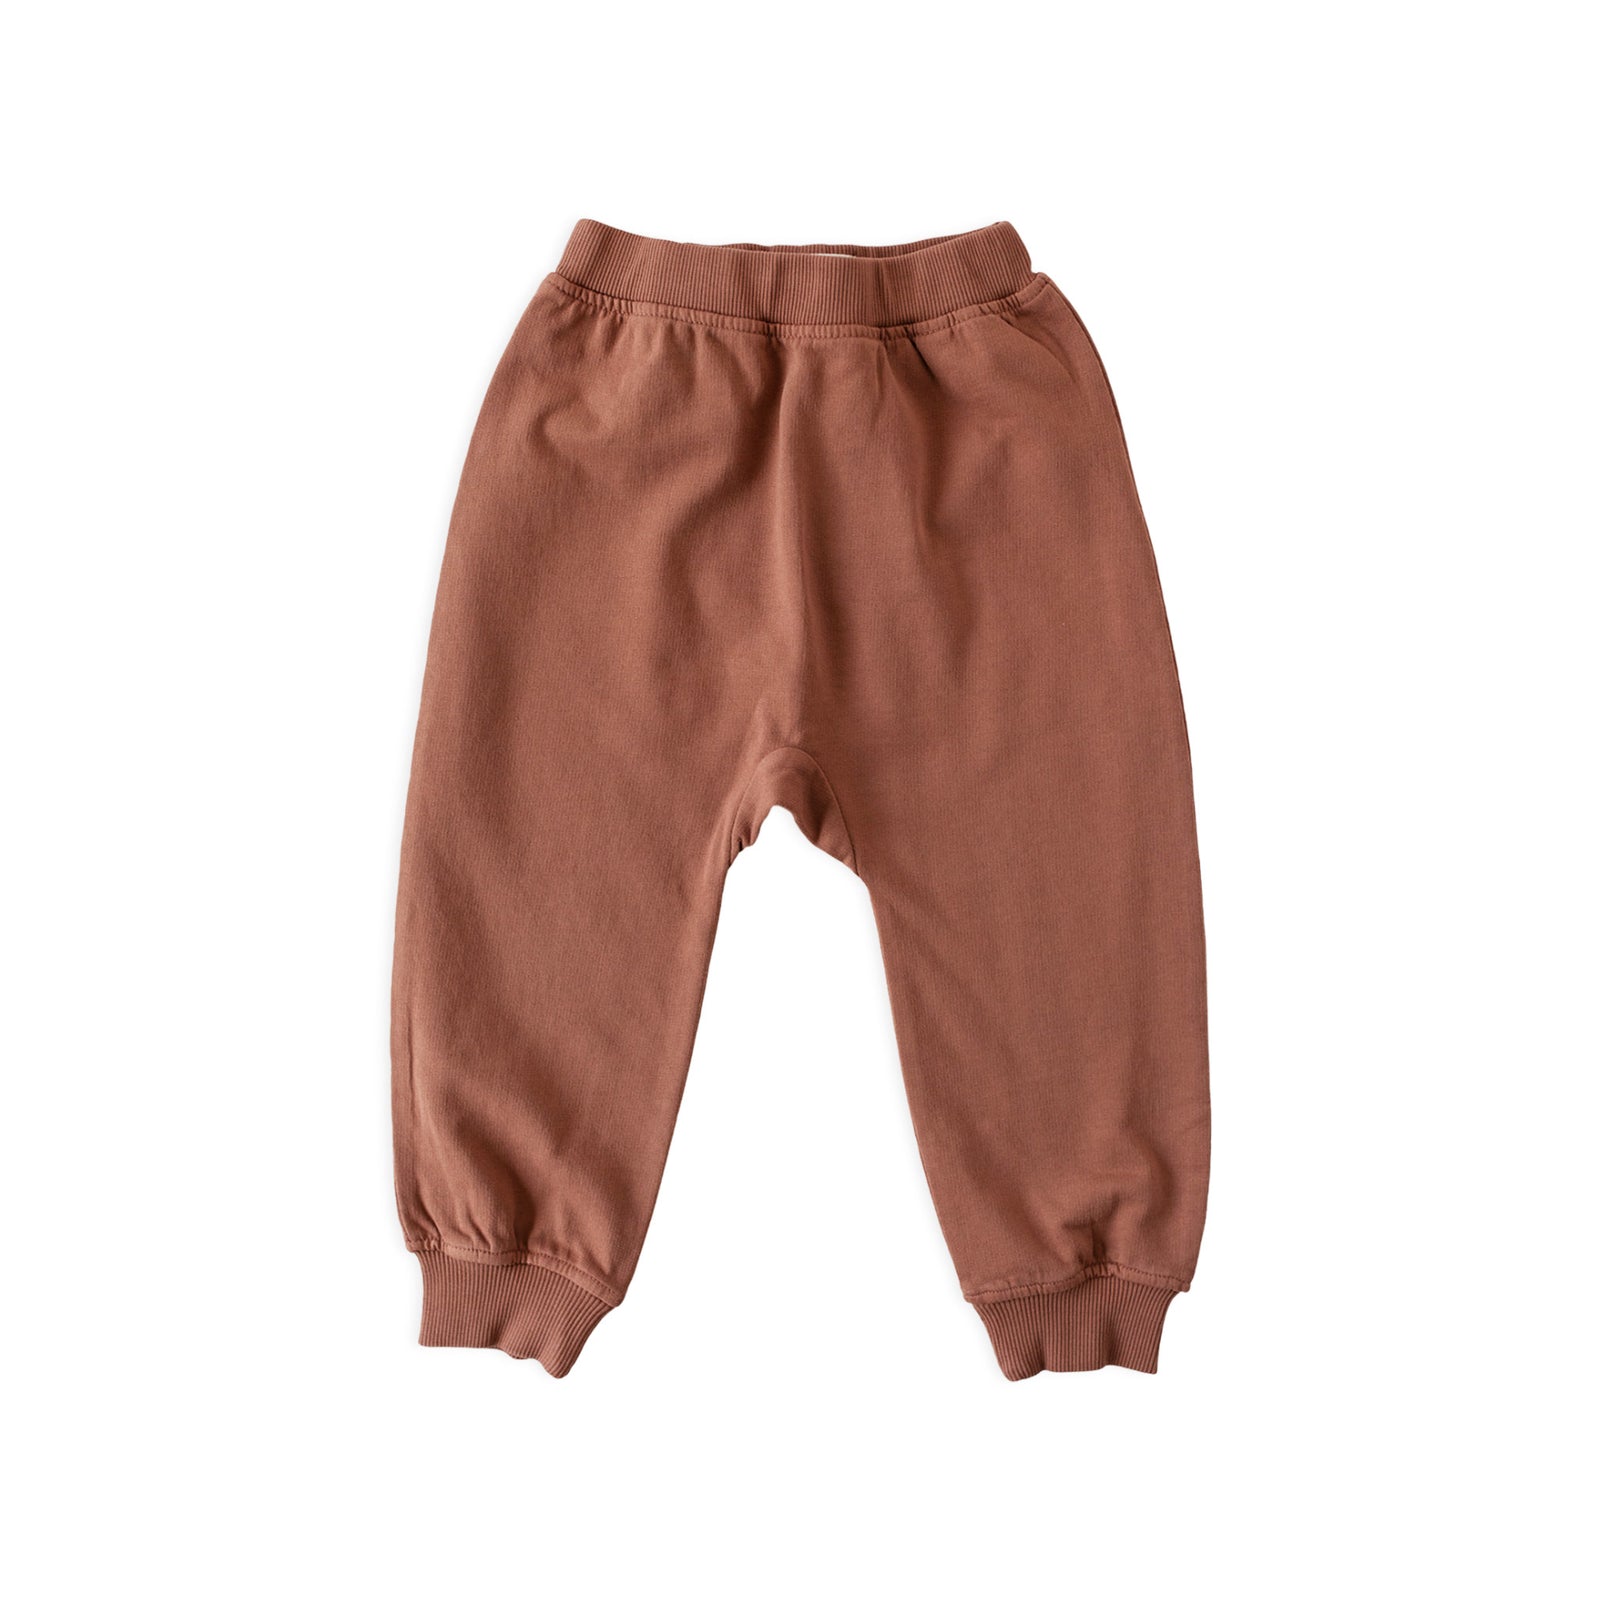 French Terry Harem Pant Pant Pehr Clay 18 - 24 mos. 